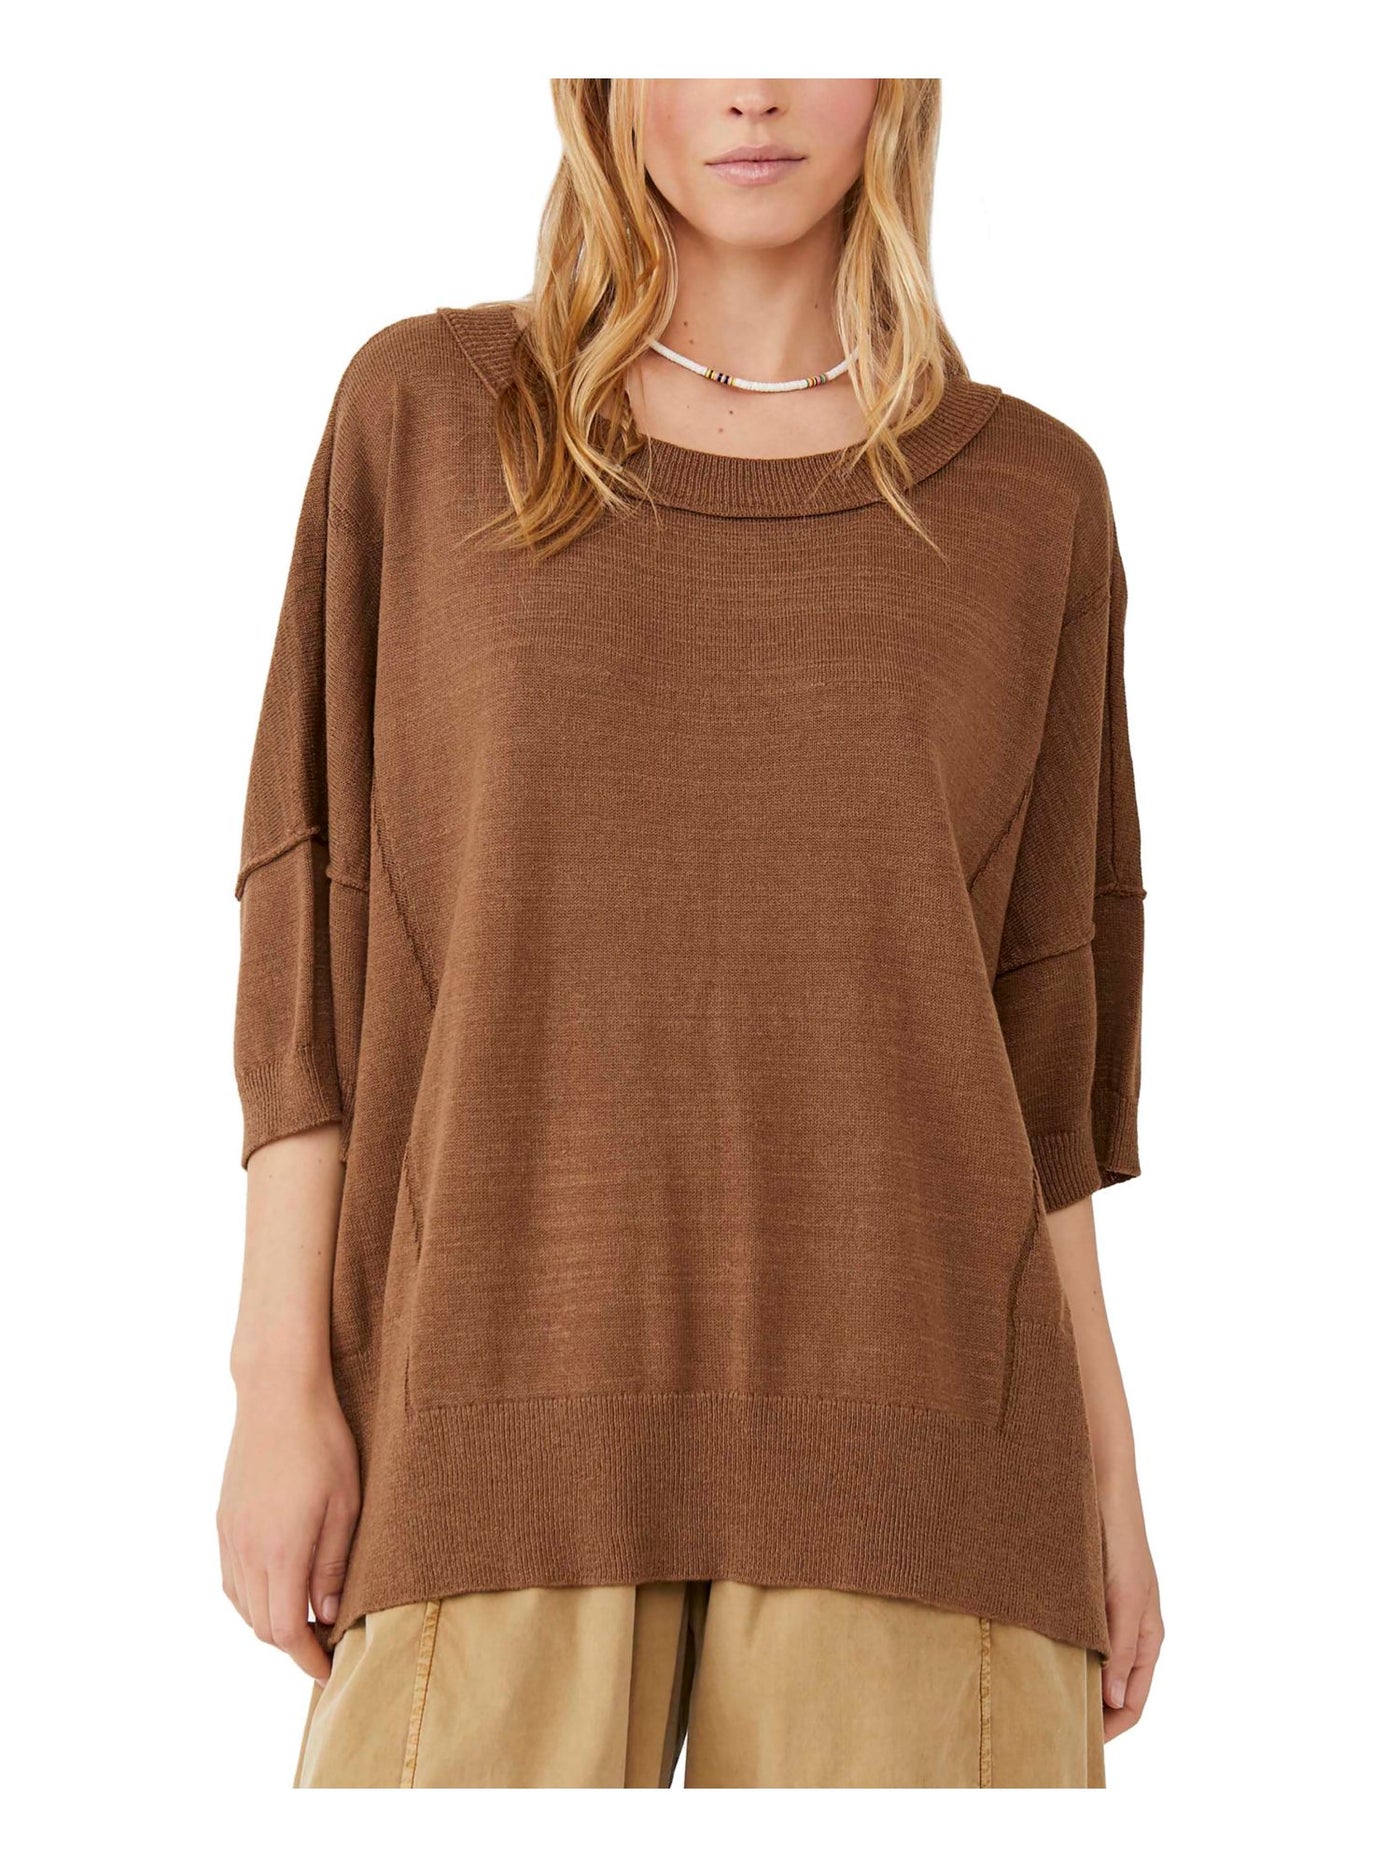 FREE PEOPLE Womens Brown Elbow Sleeve Jewel Neck T-Shirt XS